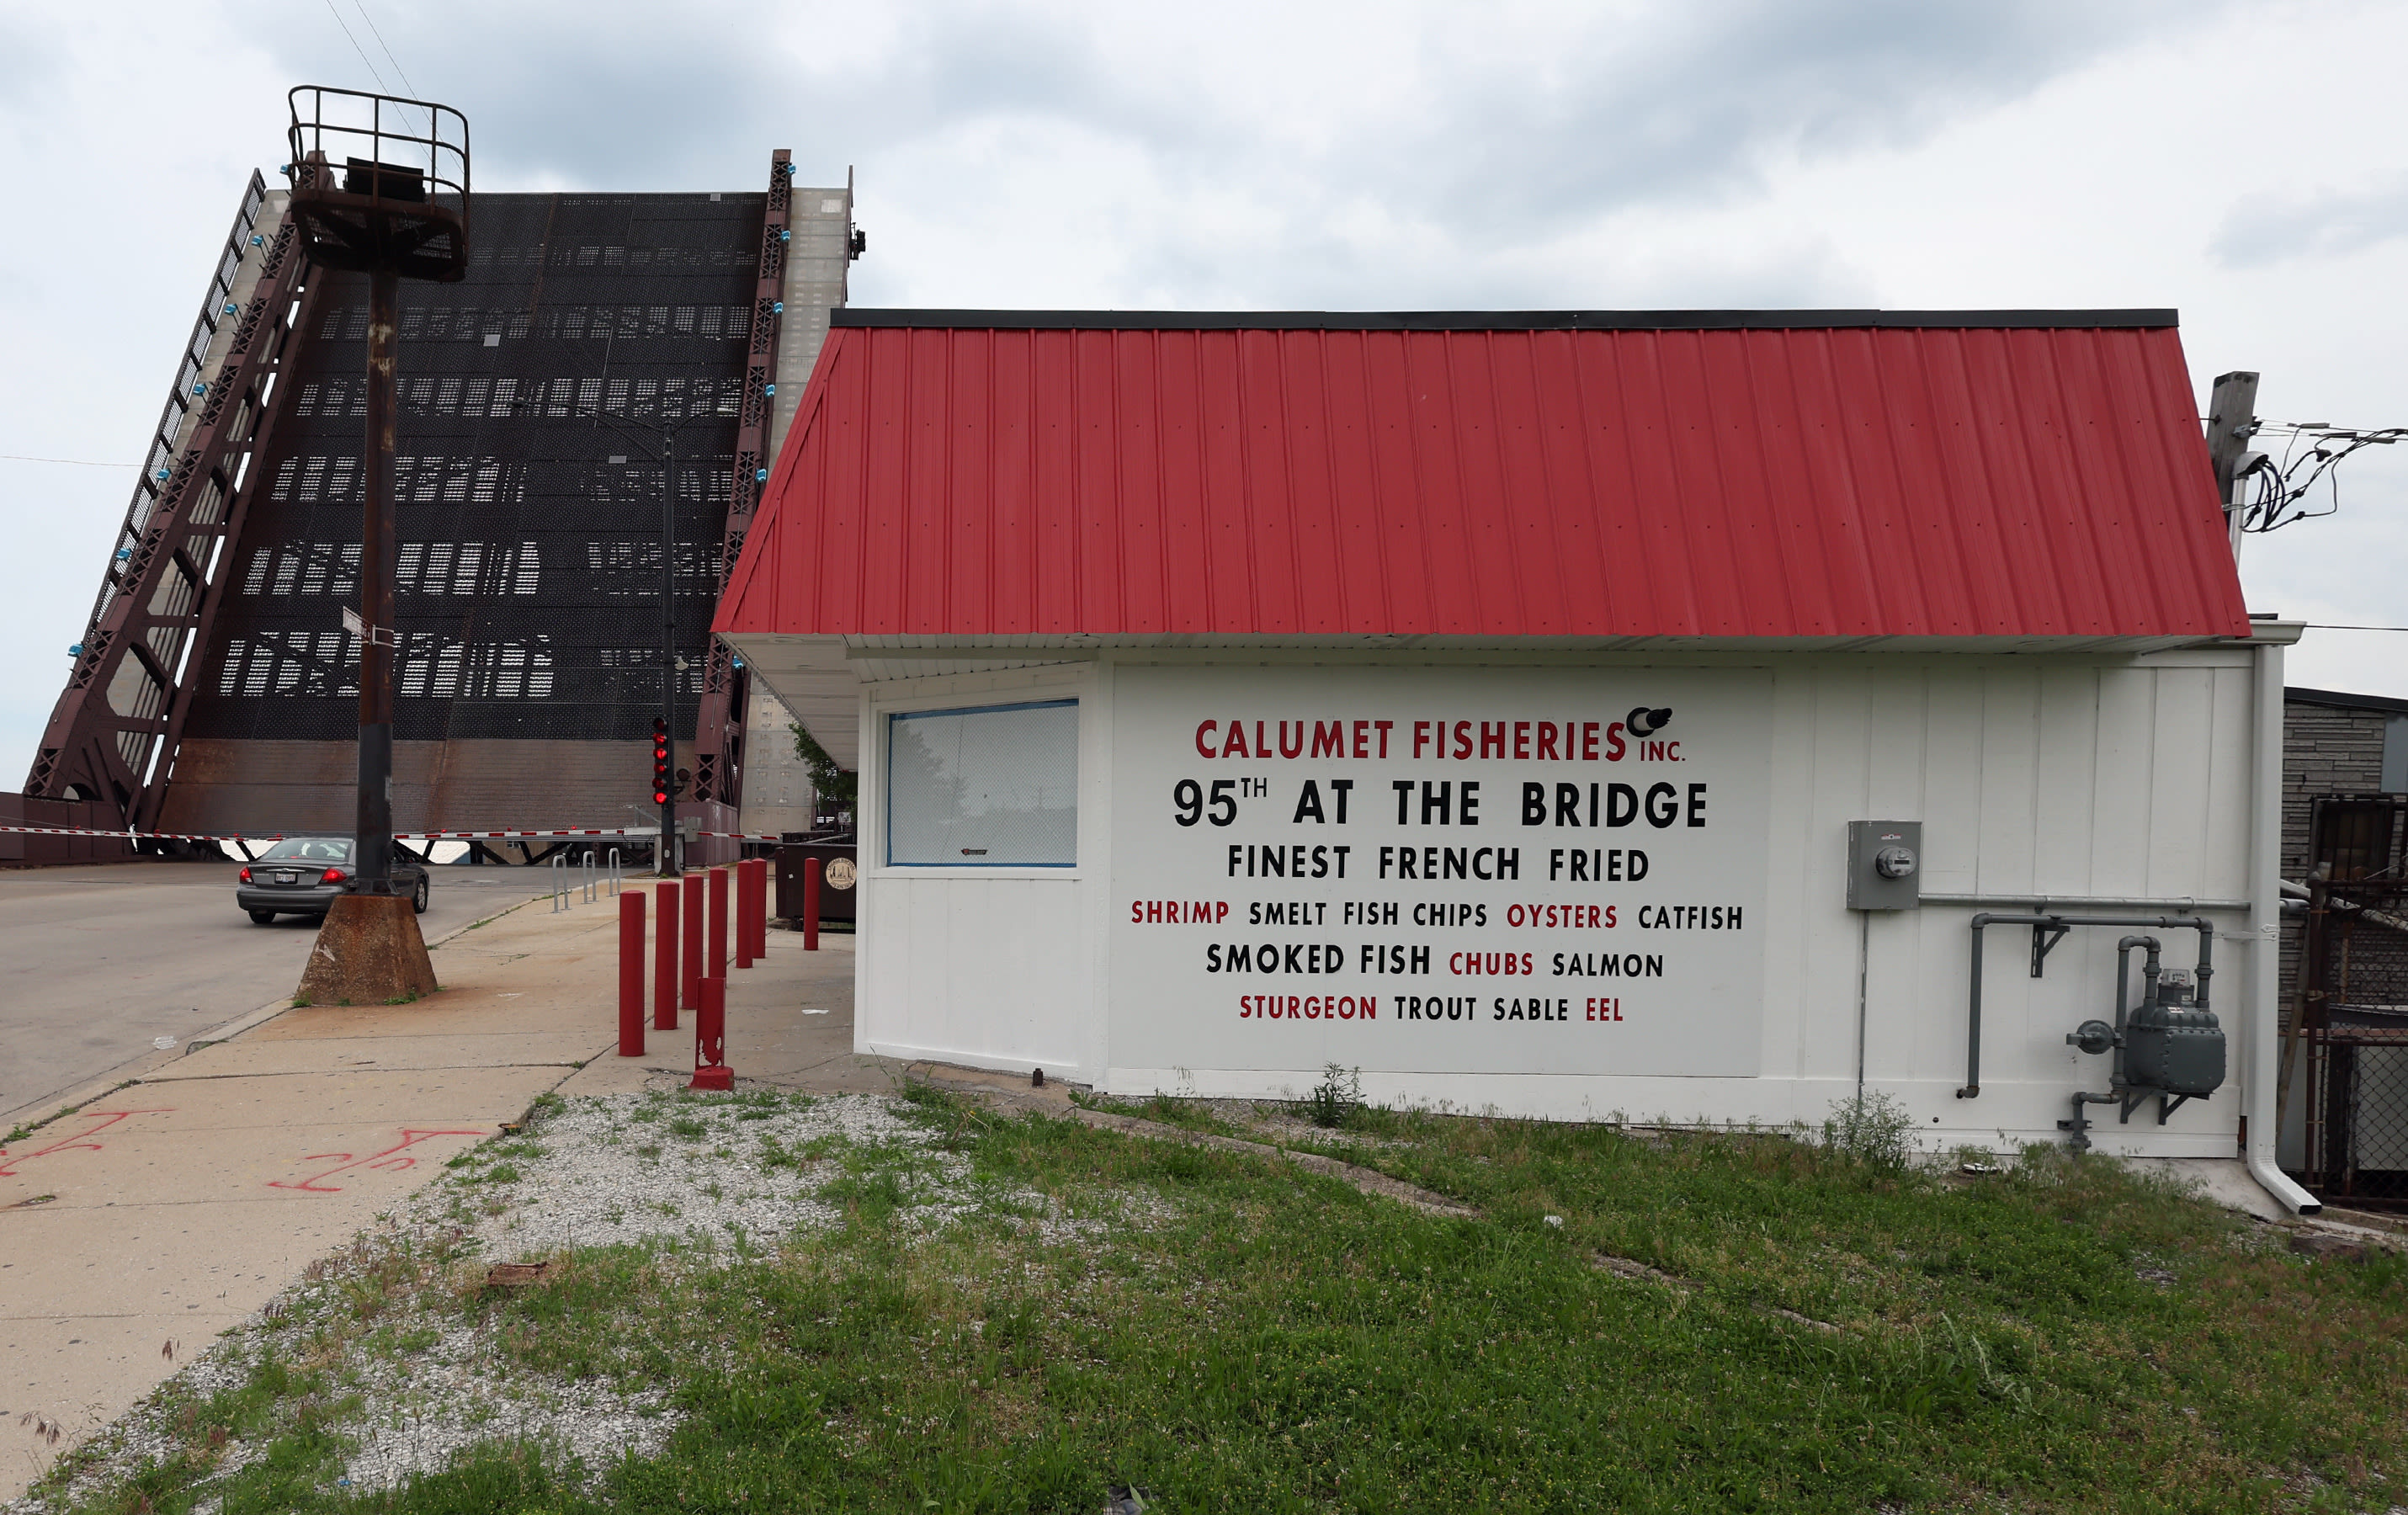 First look: Calumet Fisheries reopening on Saturday after fire: ‘It’s been a stressful six months’